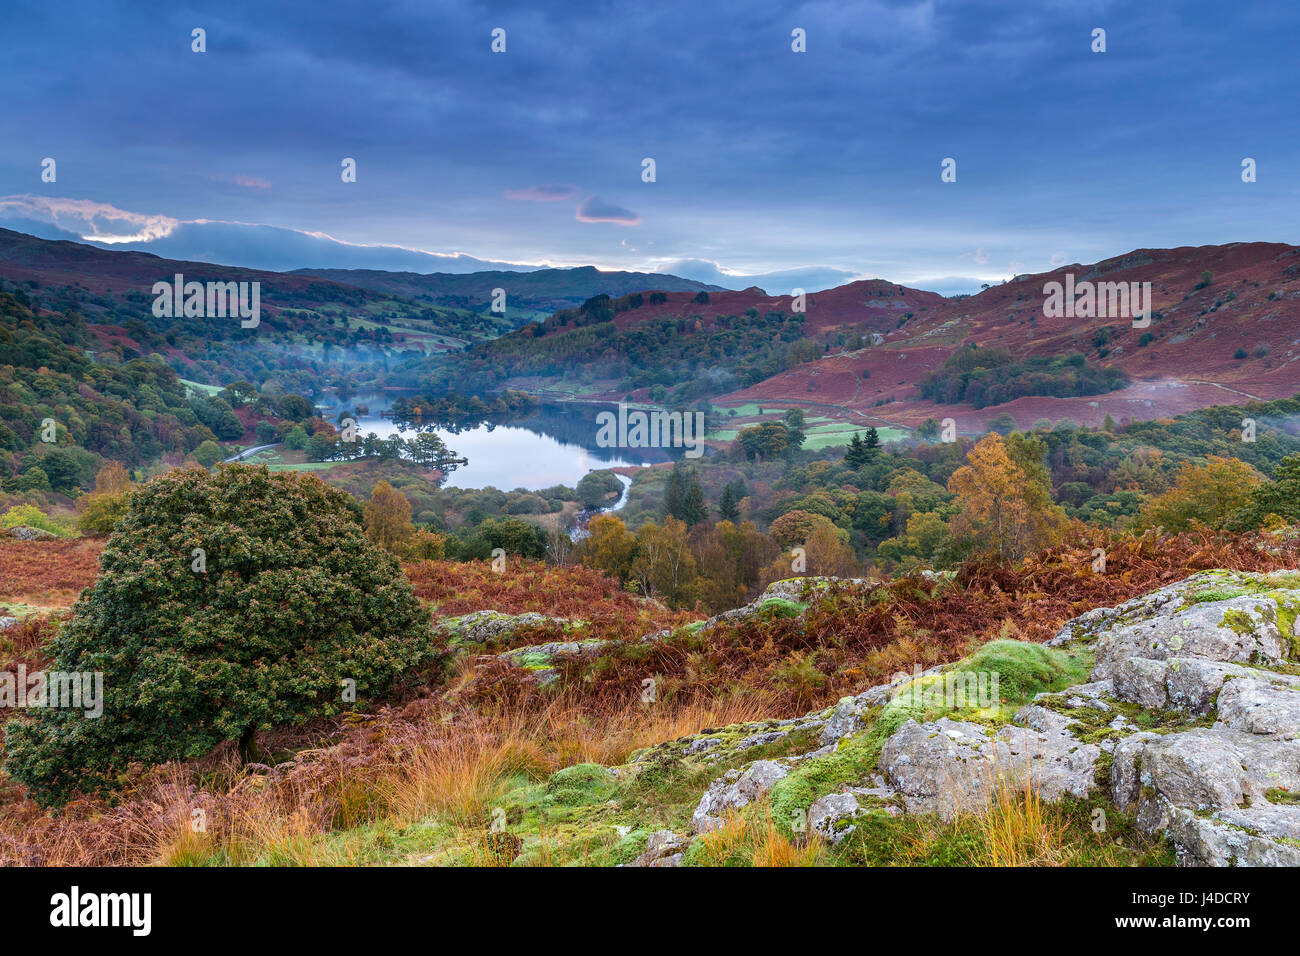 A view over Rydal Water from White Moss Common, Lake District National Park, Cumbria, England, United Kingdom, Europe. Stock Photo